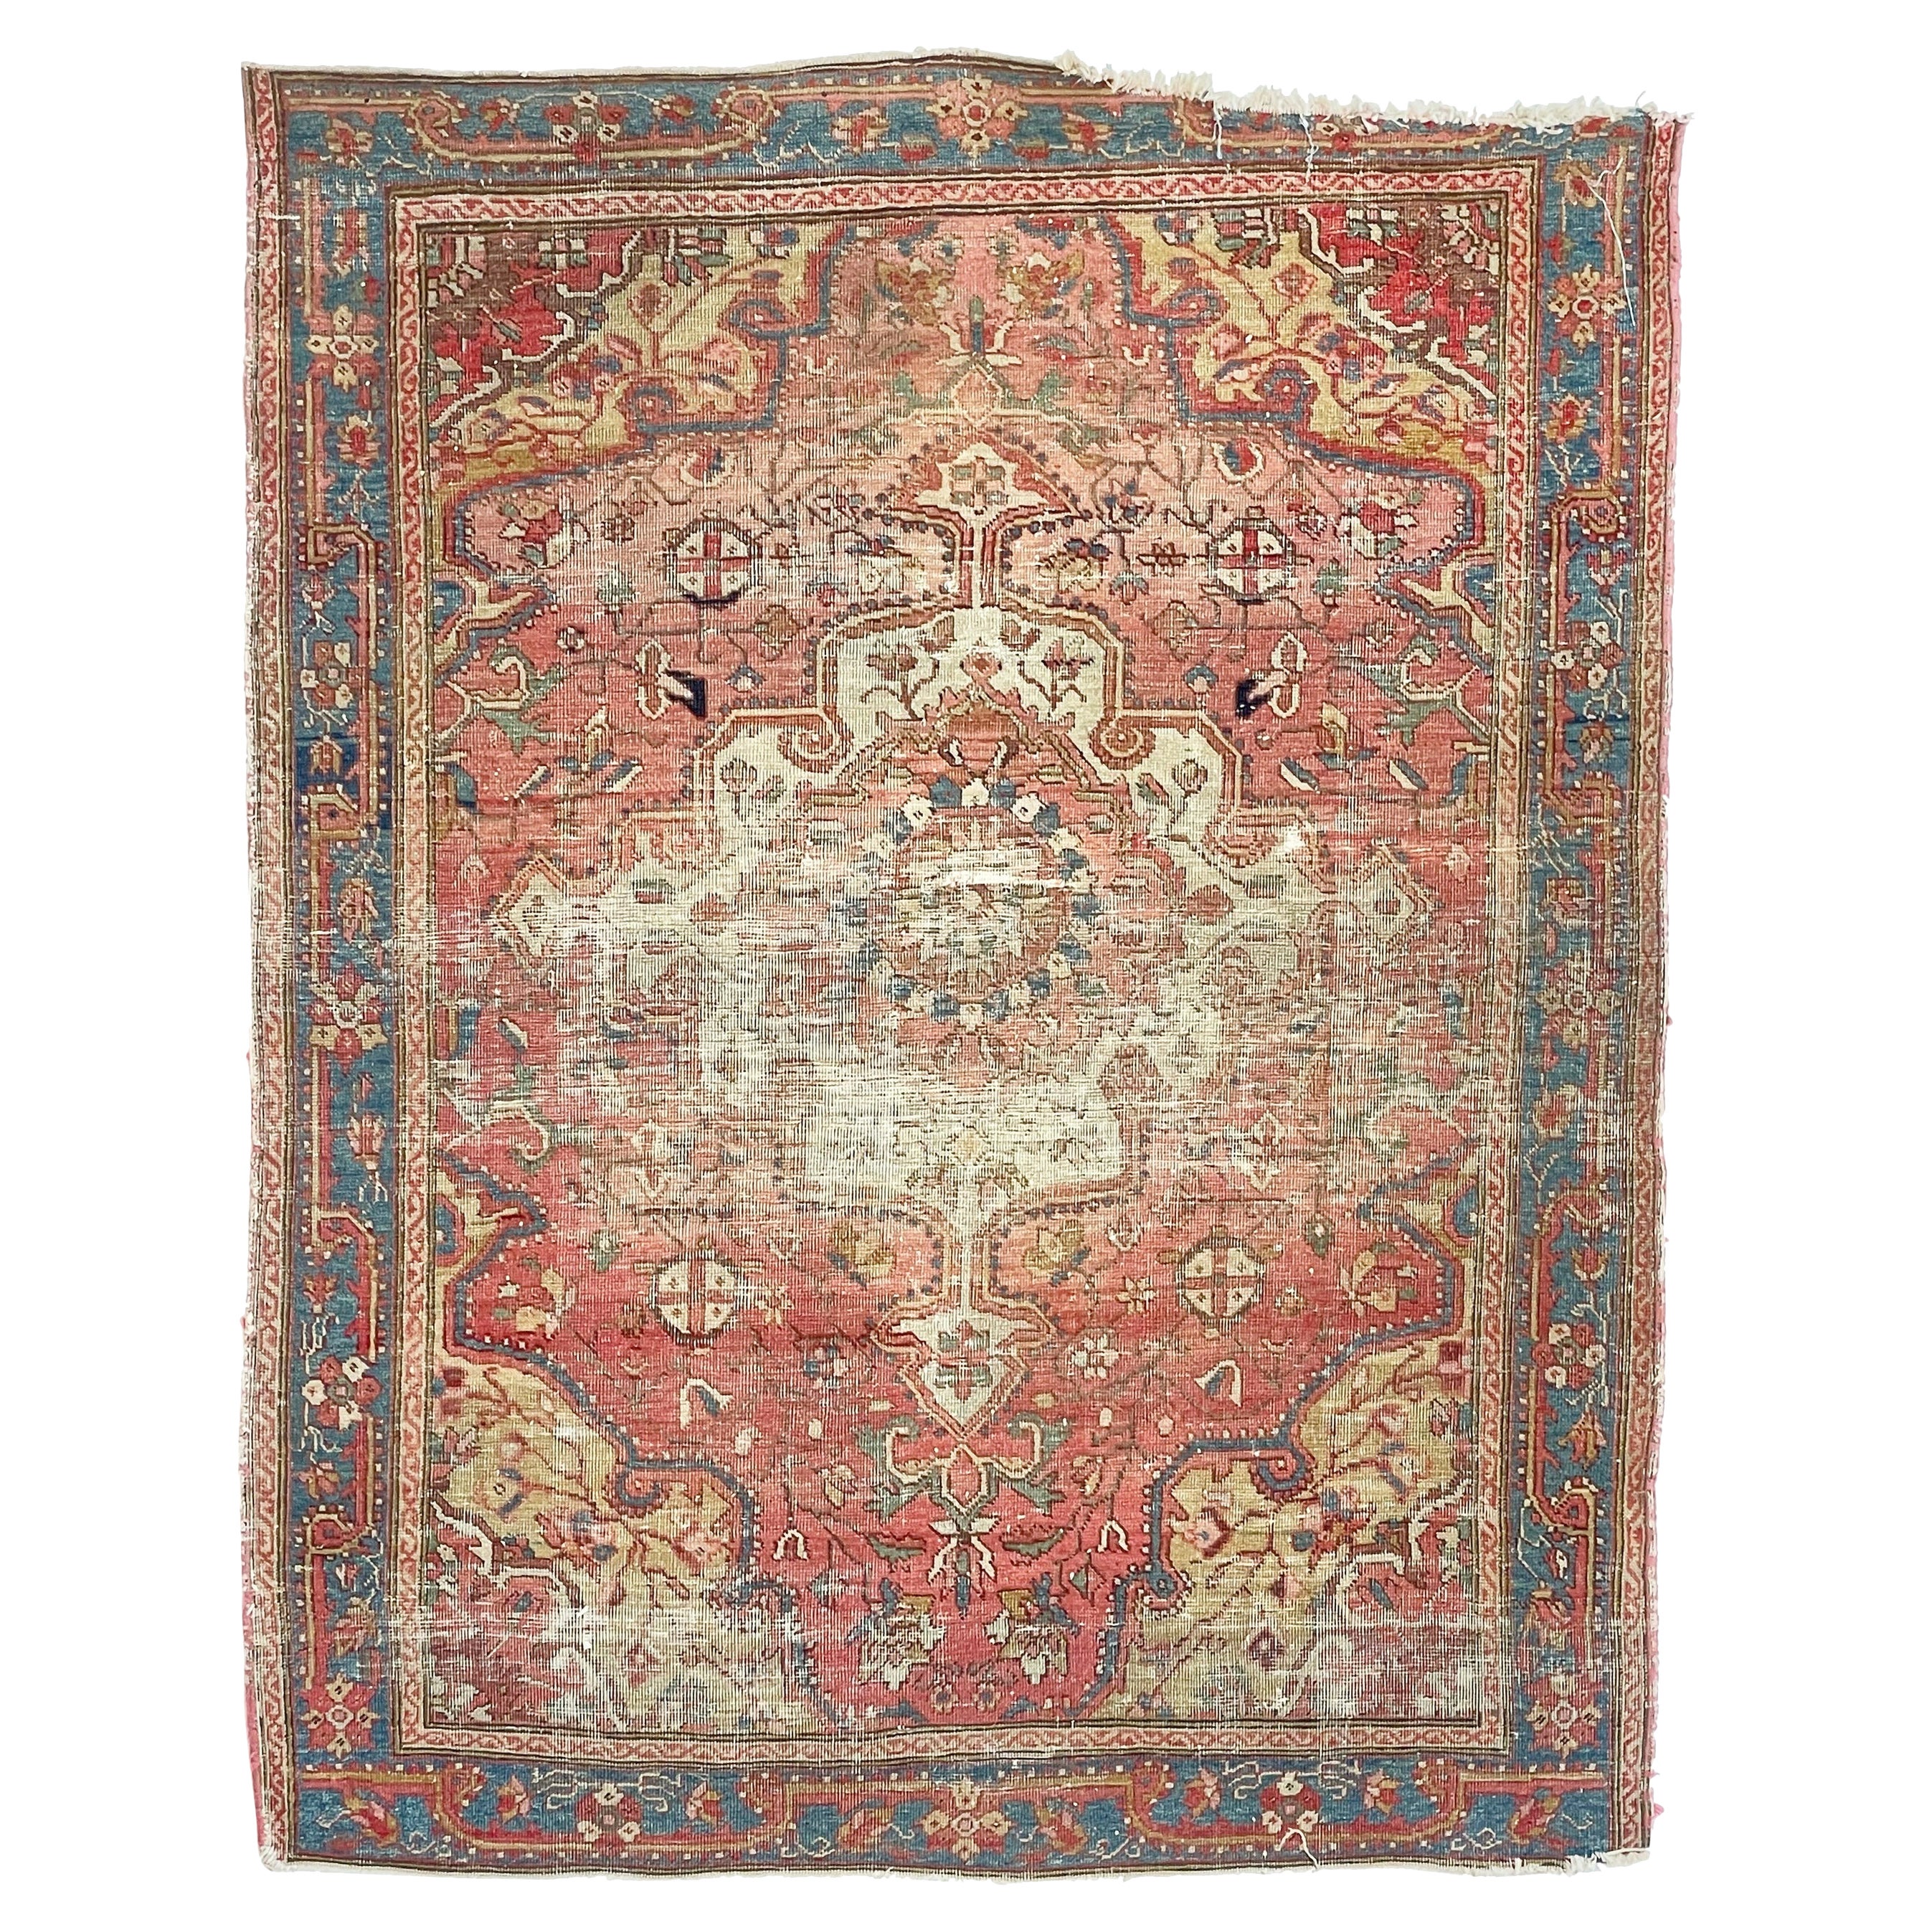 Antique Rug Squarish Size with Camel Corners, c.1910 For Sale